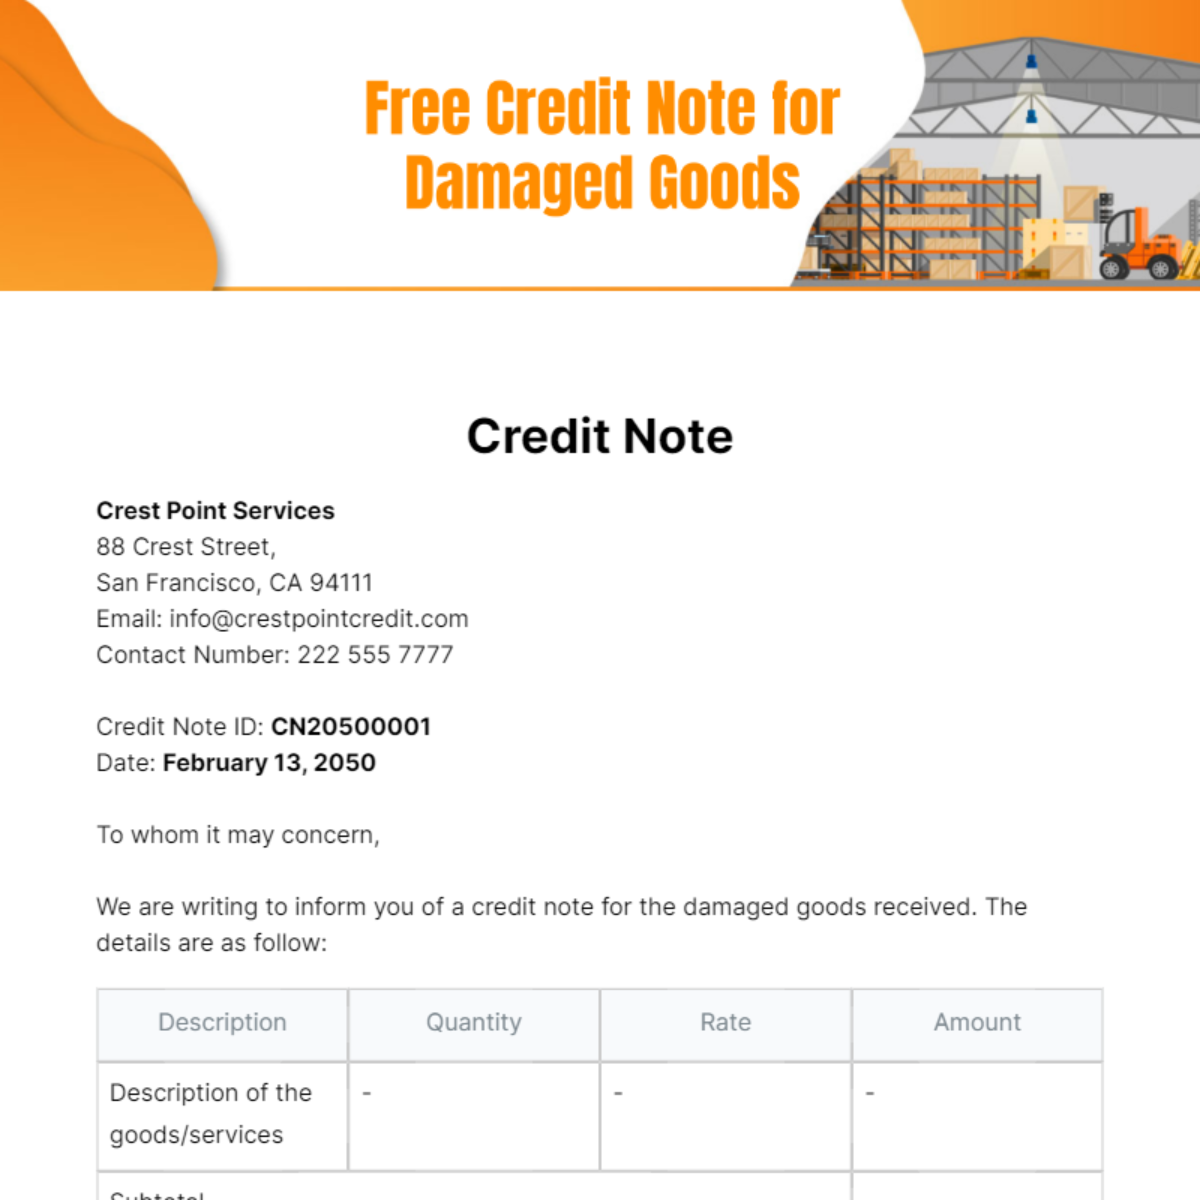 Credit Note for Damaged Goods Template